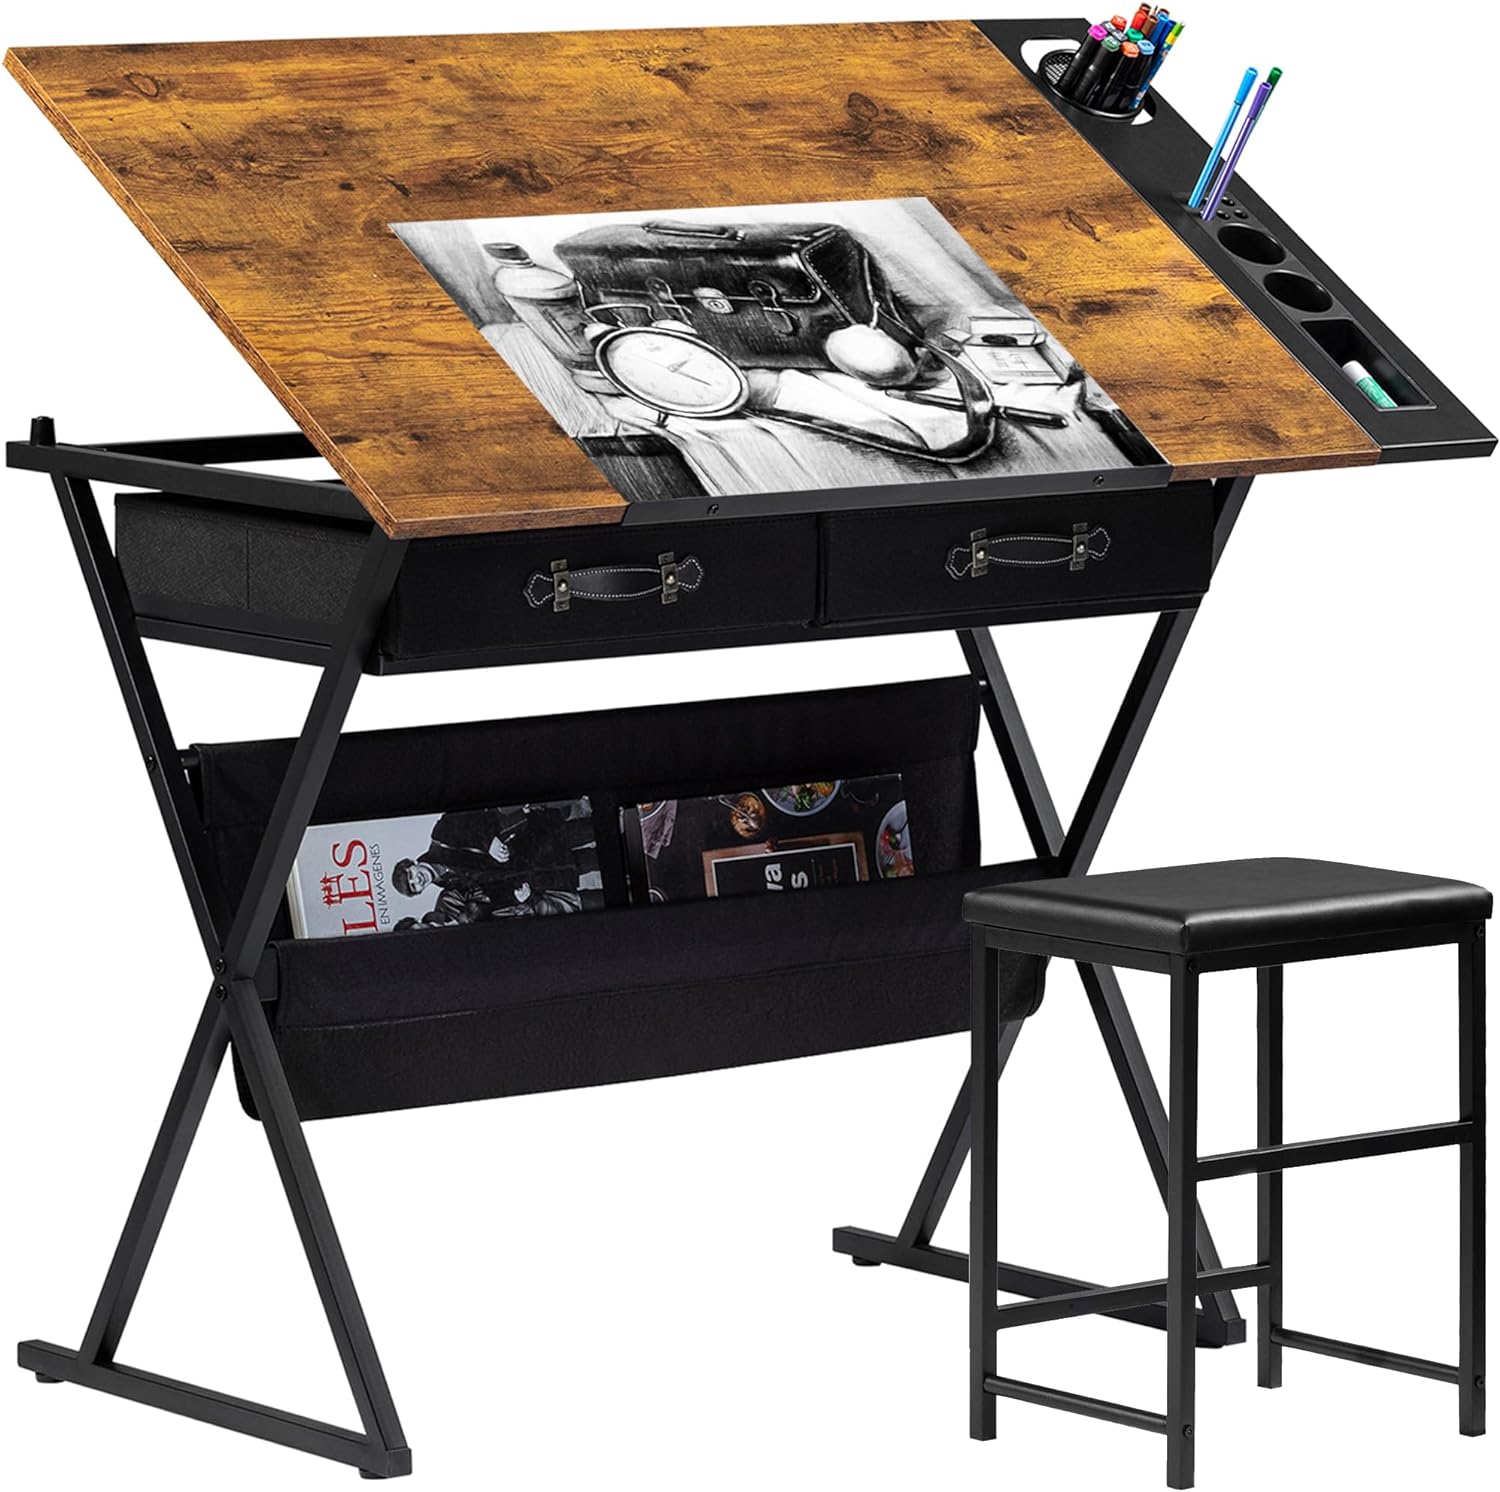 VECELO Drafting Table Adjustable Desk Tilted Tabletop with 2 Storage Drawers and Stool